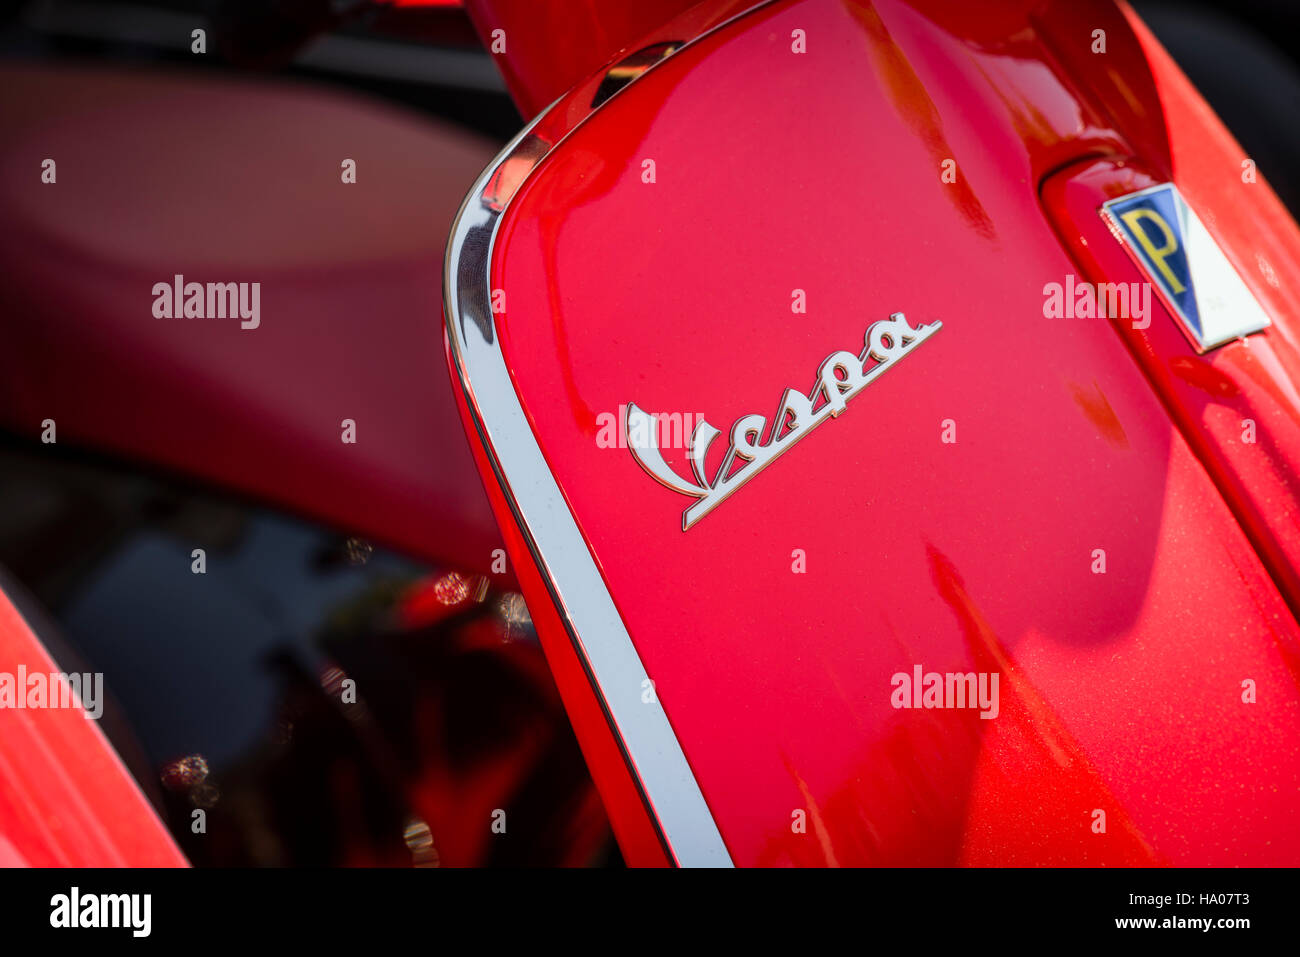 Close-up of the Vespa logo on a bright red Vespa motor scooter parked outside on a street in the sun Stock Photo